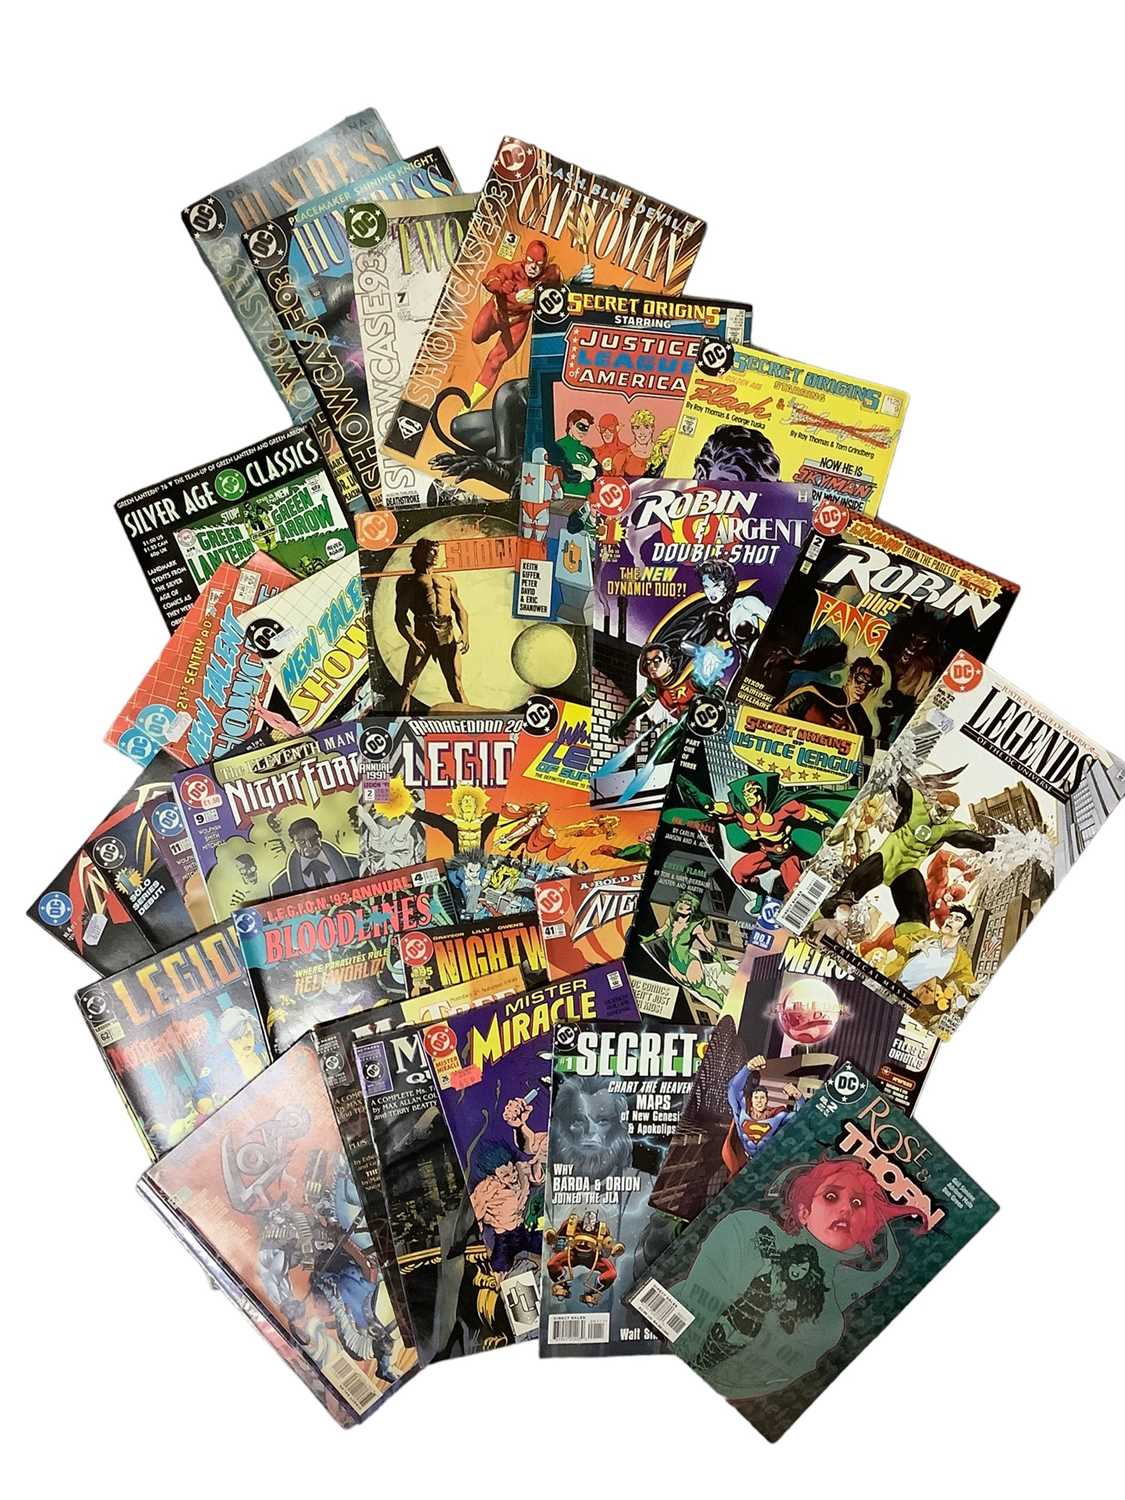 Lot 160 - Large box of mostly 1990's and 00's DC Comics to include Legion of Super Heroes , Lobo, Robin, Secret Origins and others. Approximately 580 comics